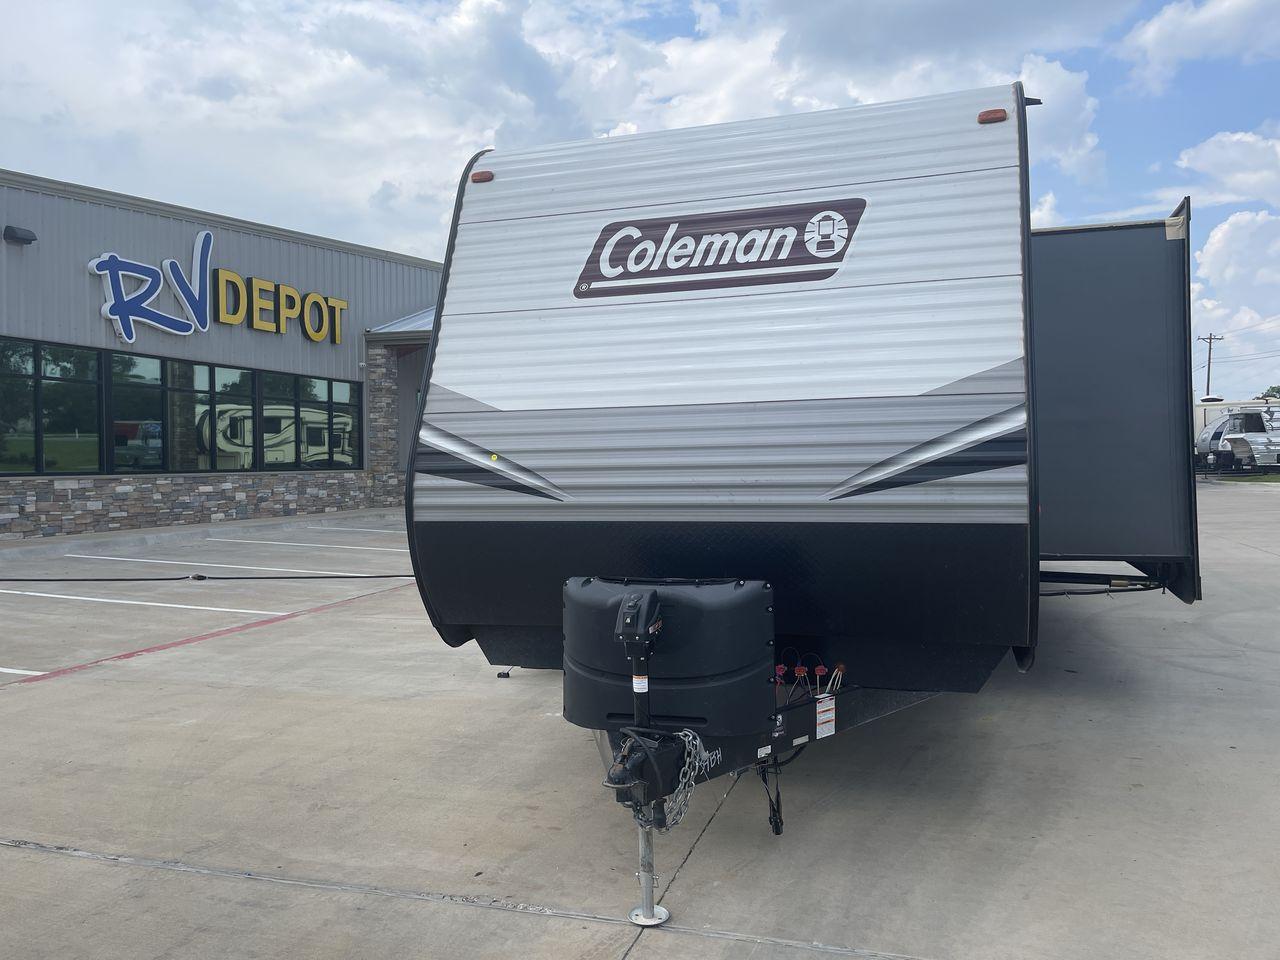 2021 WHITE DUTCHMEN COLEMAN 334BH (4YDT3342XMH) , Length: 37.25 ft. | Dry Weight: 7,806 lbs. | Slides: 2 transmission, located at 4319 N Main St, Cleburne, TX, 76033, (817) 678-5133, 32.385960, -97.391212 - This 2021 Dutchmen Coleman 334BH measures 37.25 ft. and has a dry weight of 7,806 lbs. It has two power-retractable slideouts as well as a 16-foot power-retractable awning. This big and spacious travel trailer can sleep up to 10 people! The unit also comes equipped with an outside shower and outside - Photo #0